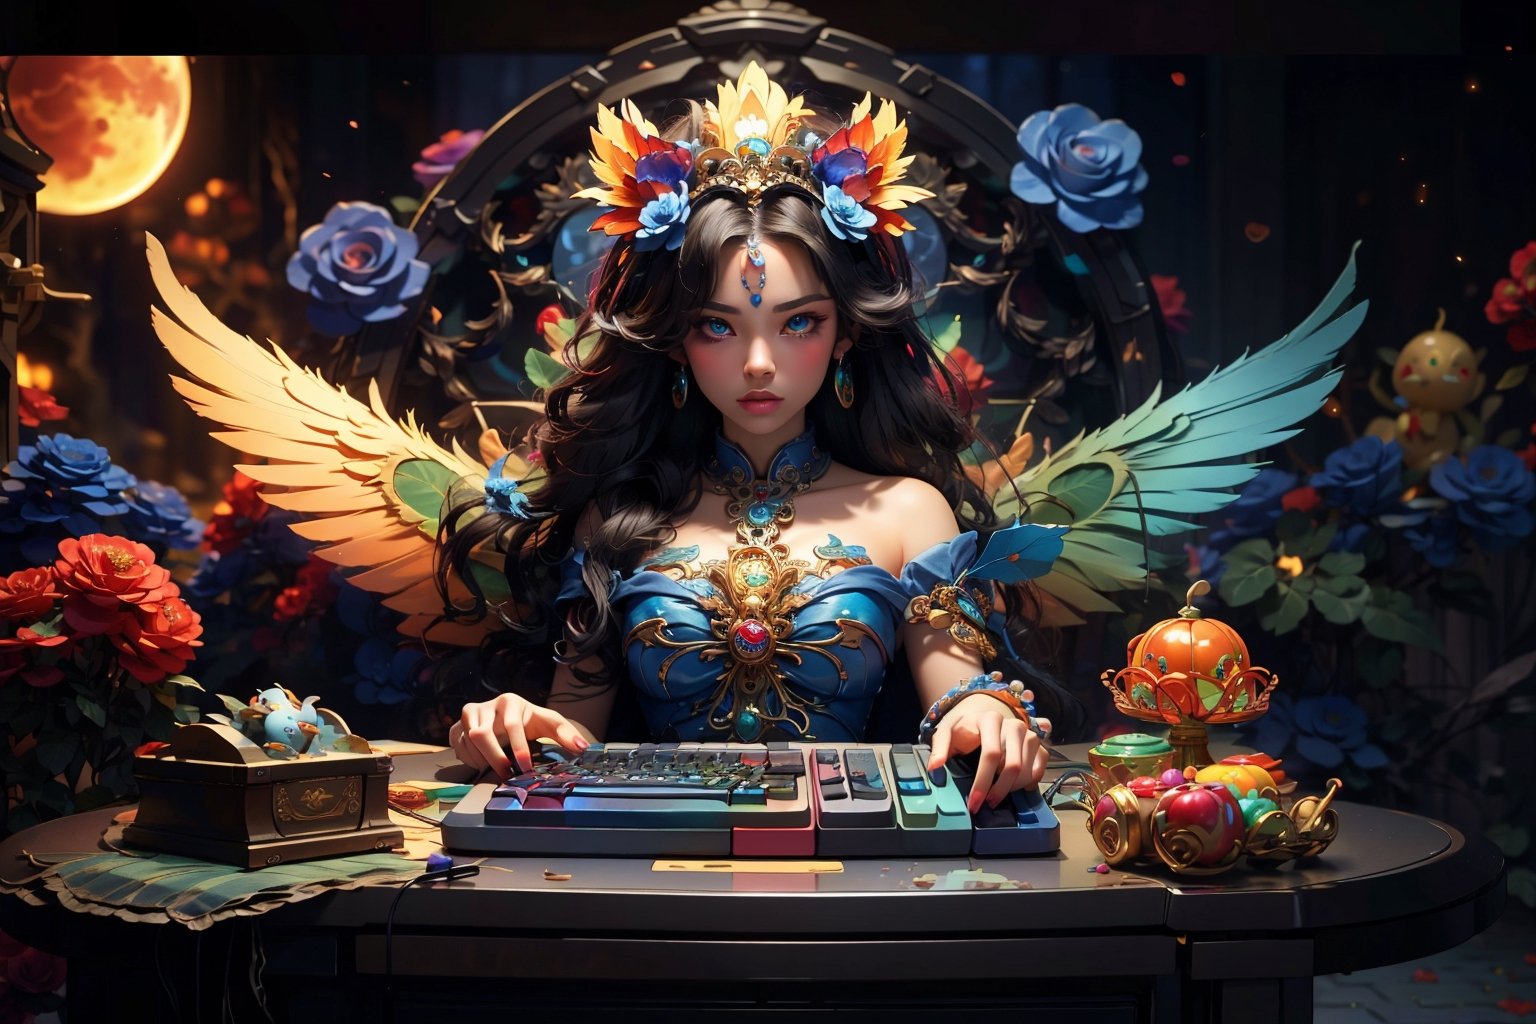 Best Quality, masterpiece, ultra-high resolution, (illustration:1.2), (photo realistic: 1.4) , Surrealism, Fantastical verisimilitude, beautiful blue-skinned goddess Phoenix Peacock on her head, fantastical creation, thriller color scheme, surrealism, abstract, psychedelic, 1 girl,flower,castle,jyy-hd,Messy desktop, clutter, half eaten instant noodles, various snacks, mobile phones, tablets, headphones, PSPs, game controllers, illuminated keyboards and mice, scattered stationery,(various mooncakes), (RGB keyboard computer:1.3), monitor, mouse (computer), hi tech, chair, speaker, light bar, nice hands,